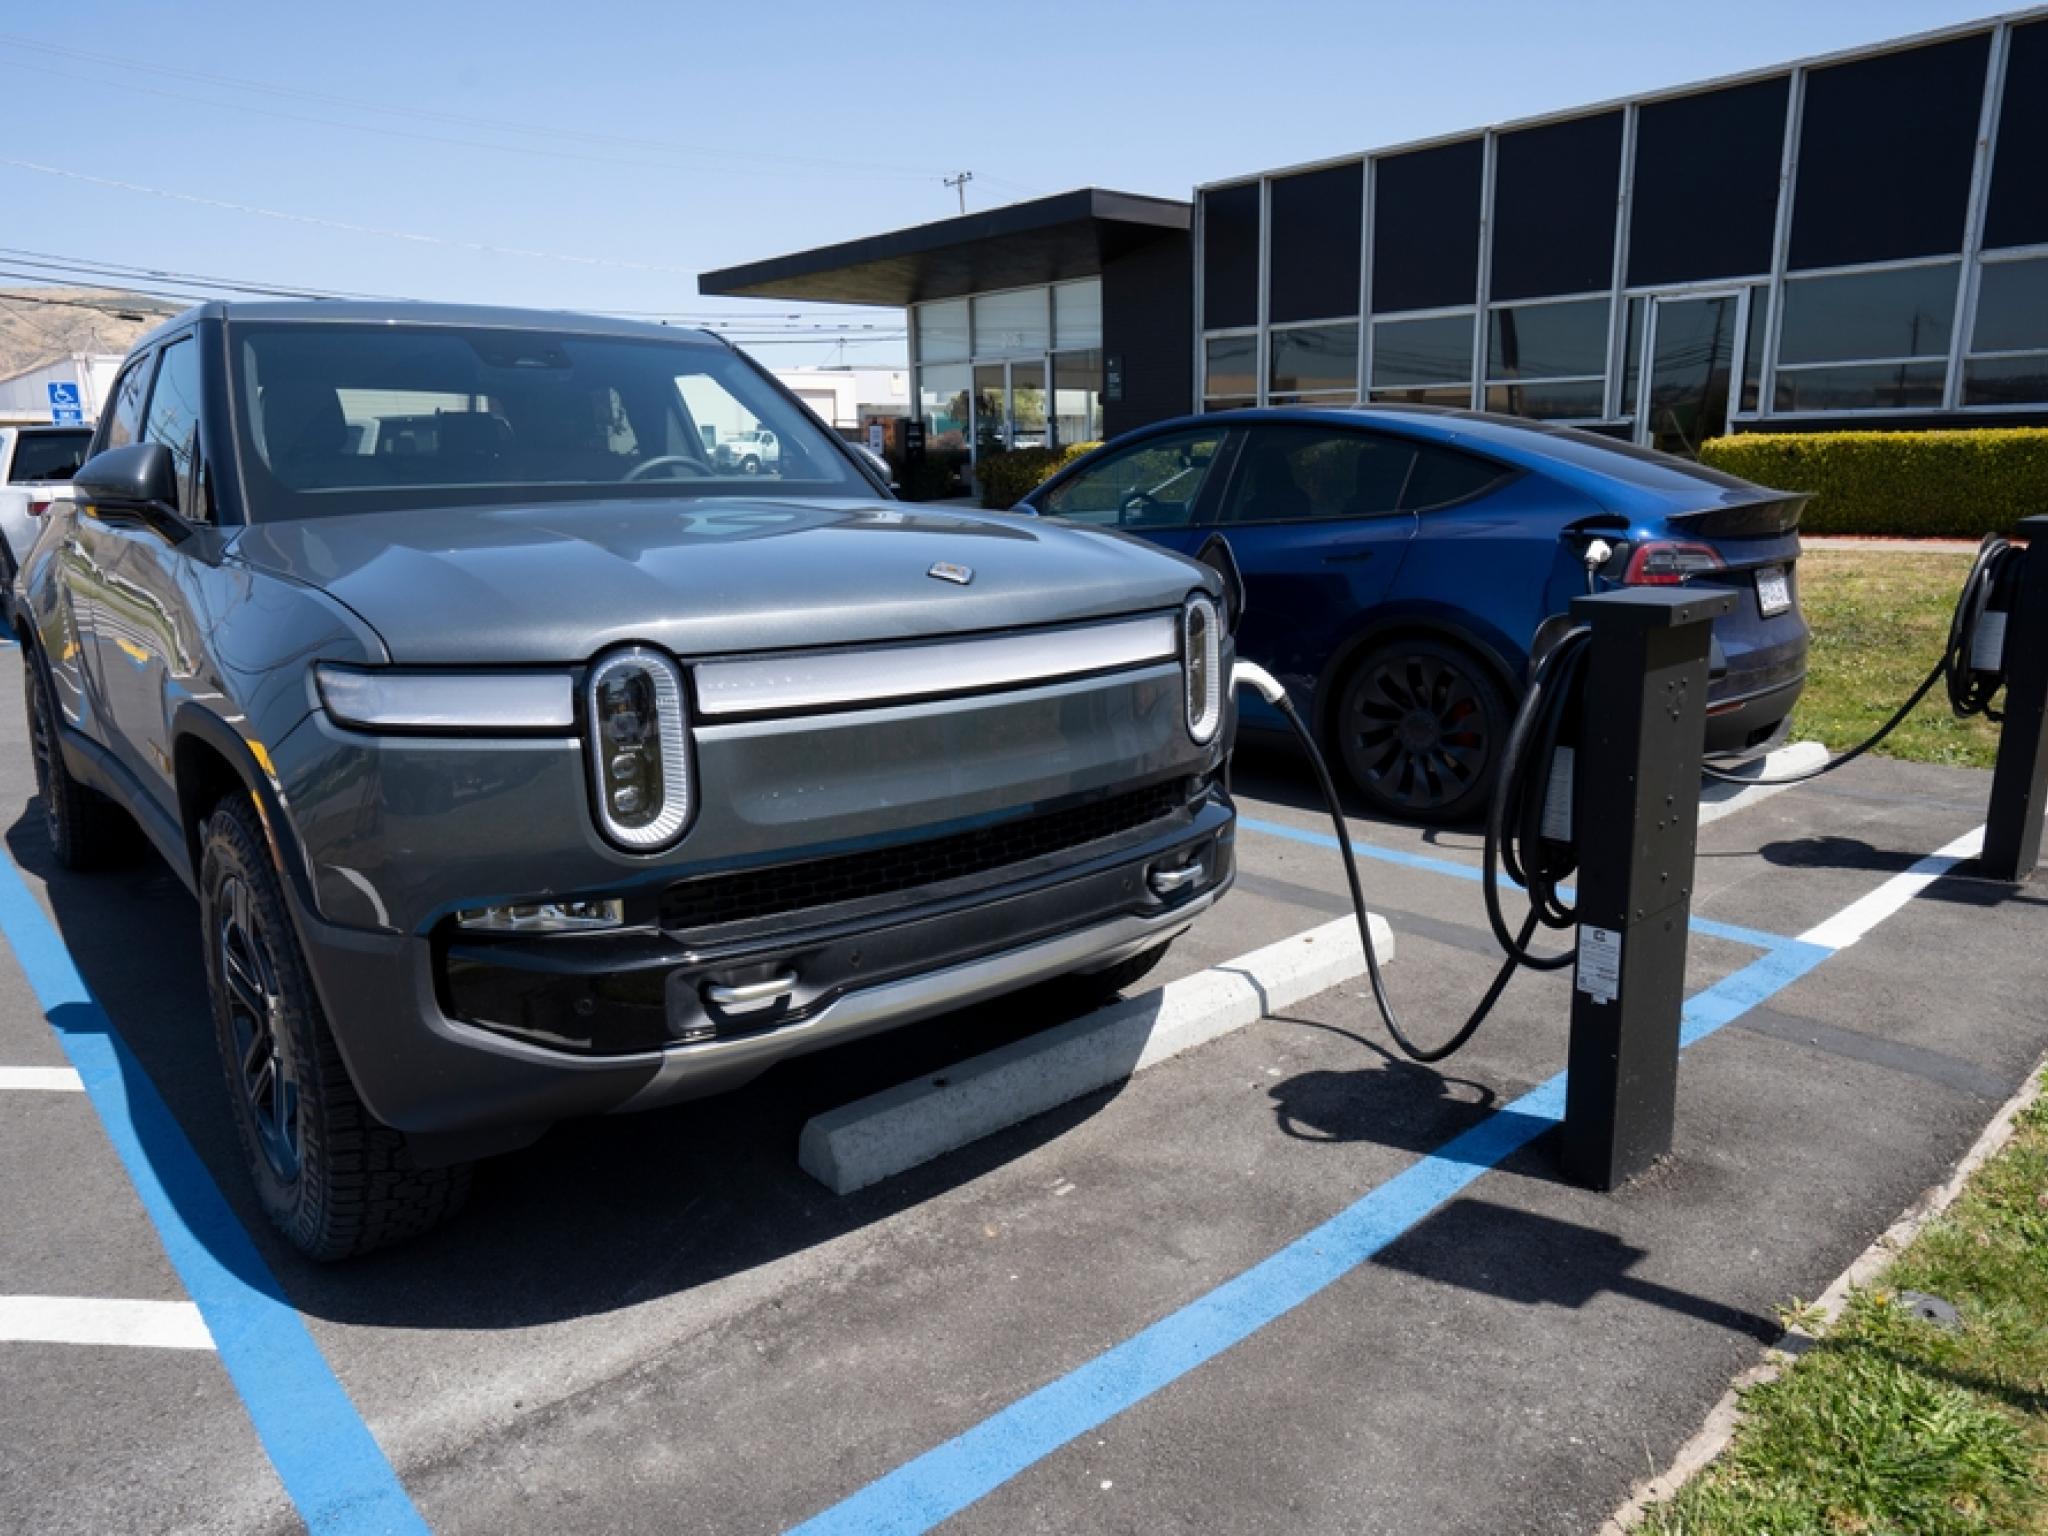  rivian-takes-leaf-from-tesla-playbook-to-open-its-charging-network-to-rival-ev-drivers-this-summer 